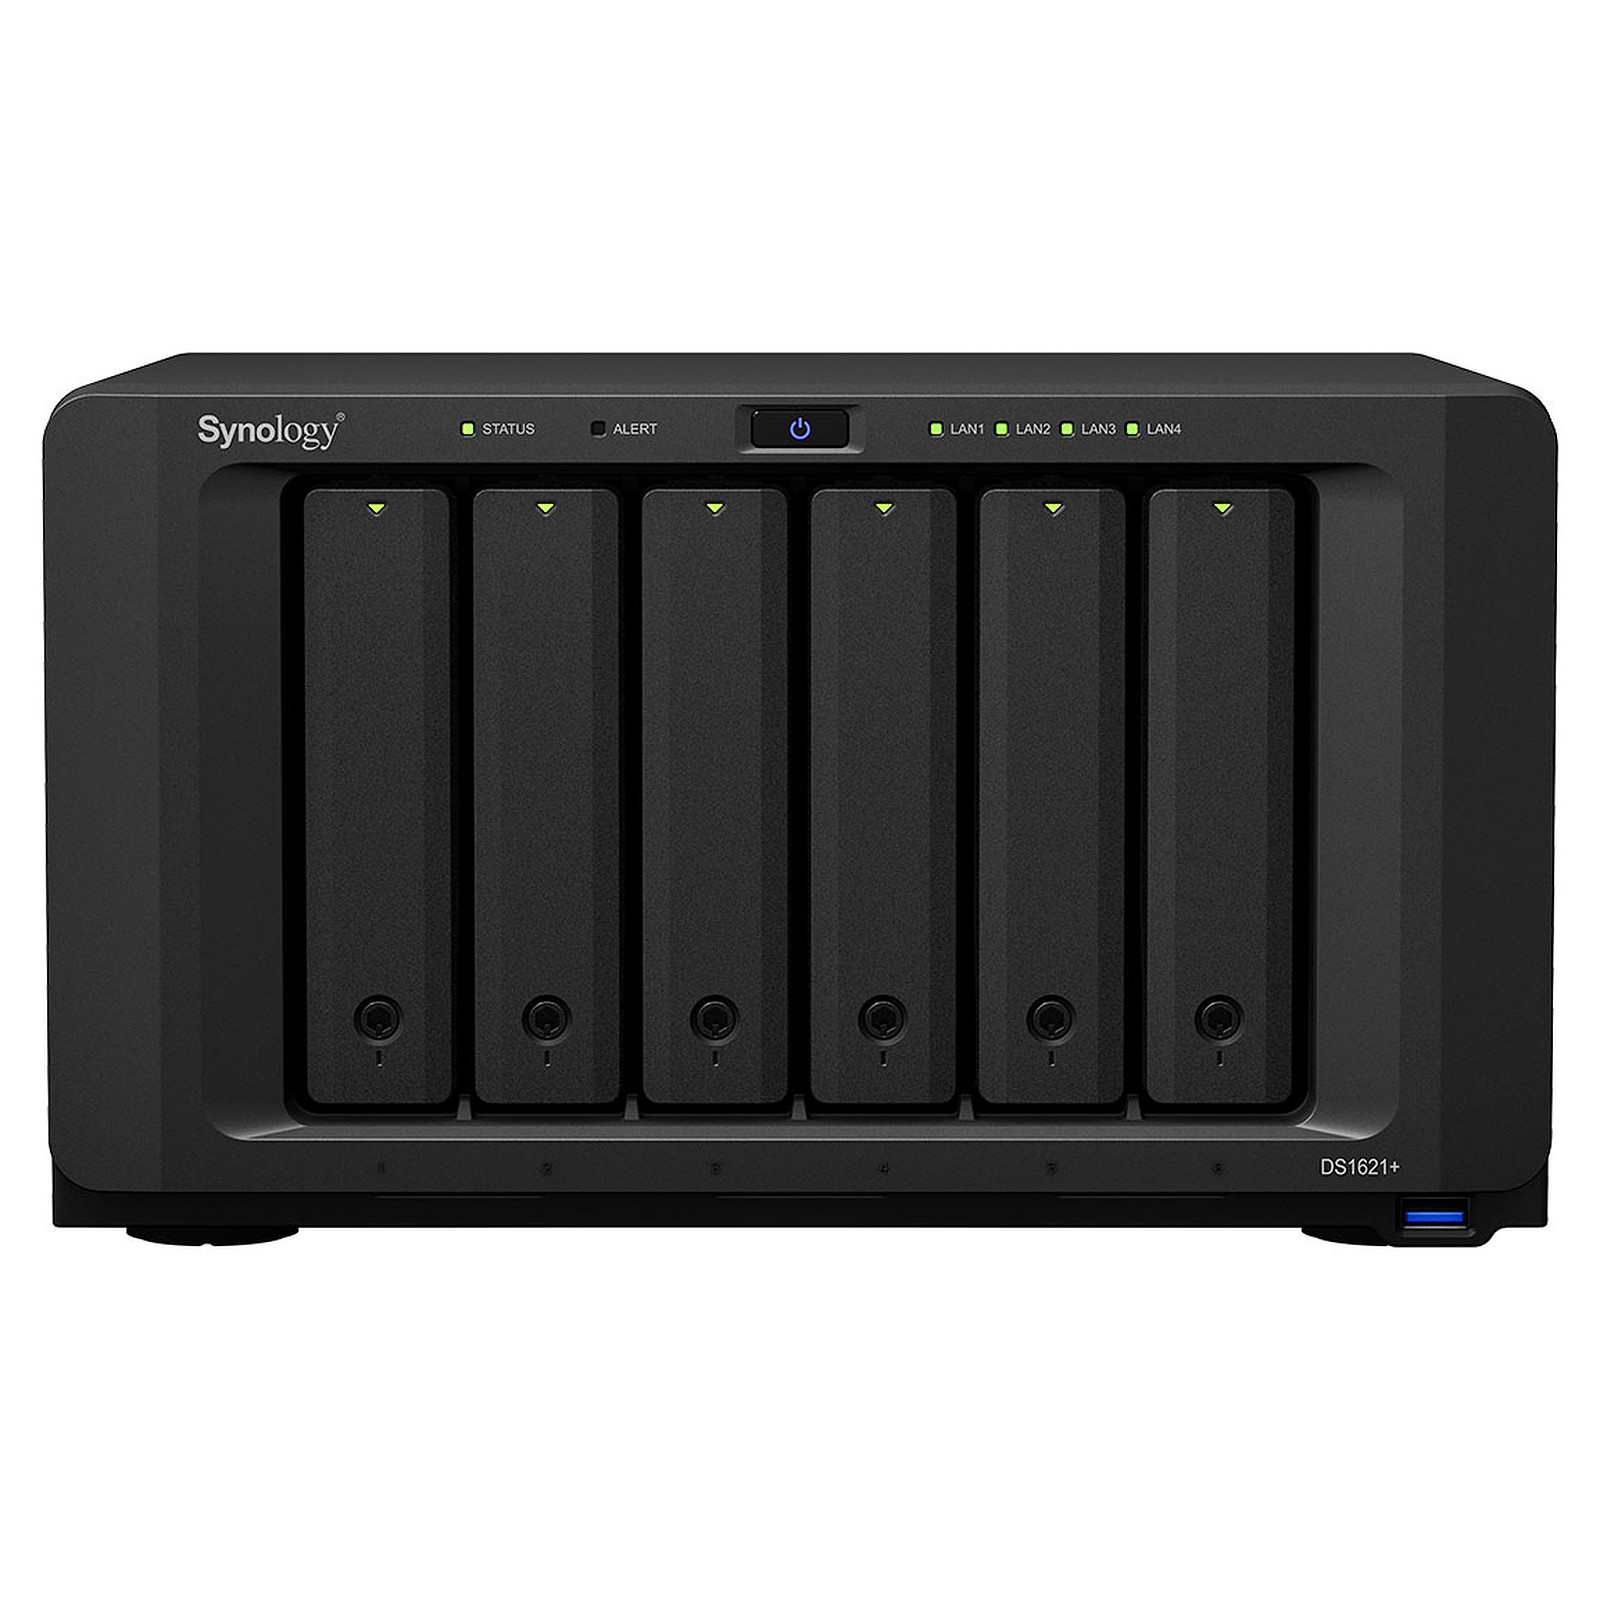 Synology DiskStation DS1621+ - Serveur NAS Synology